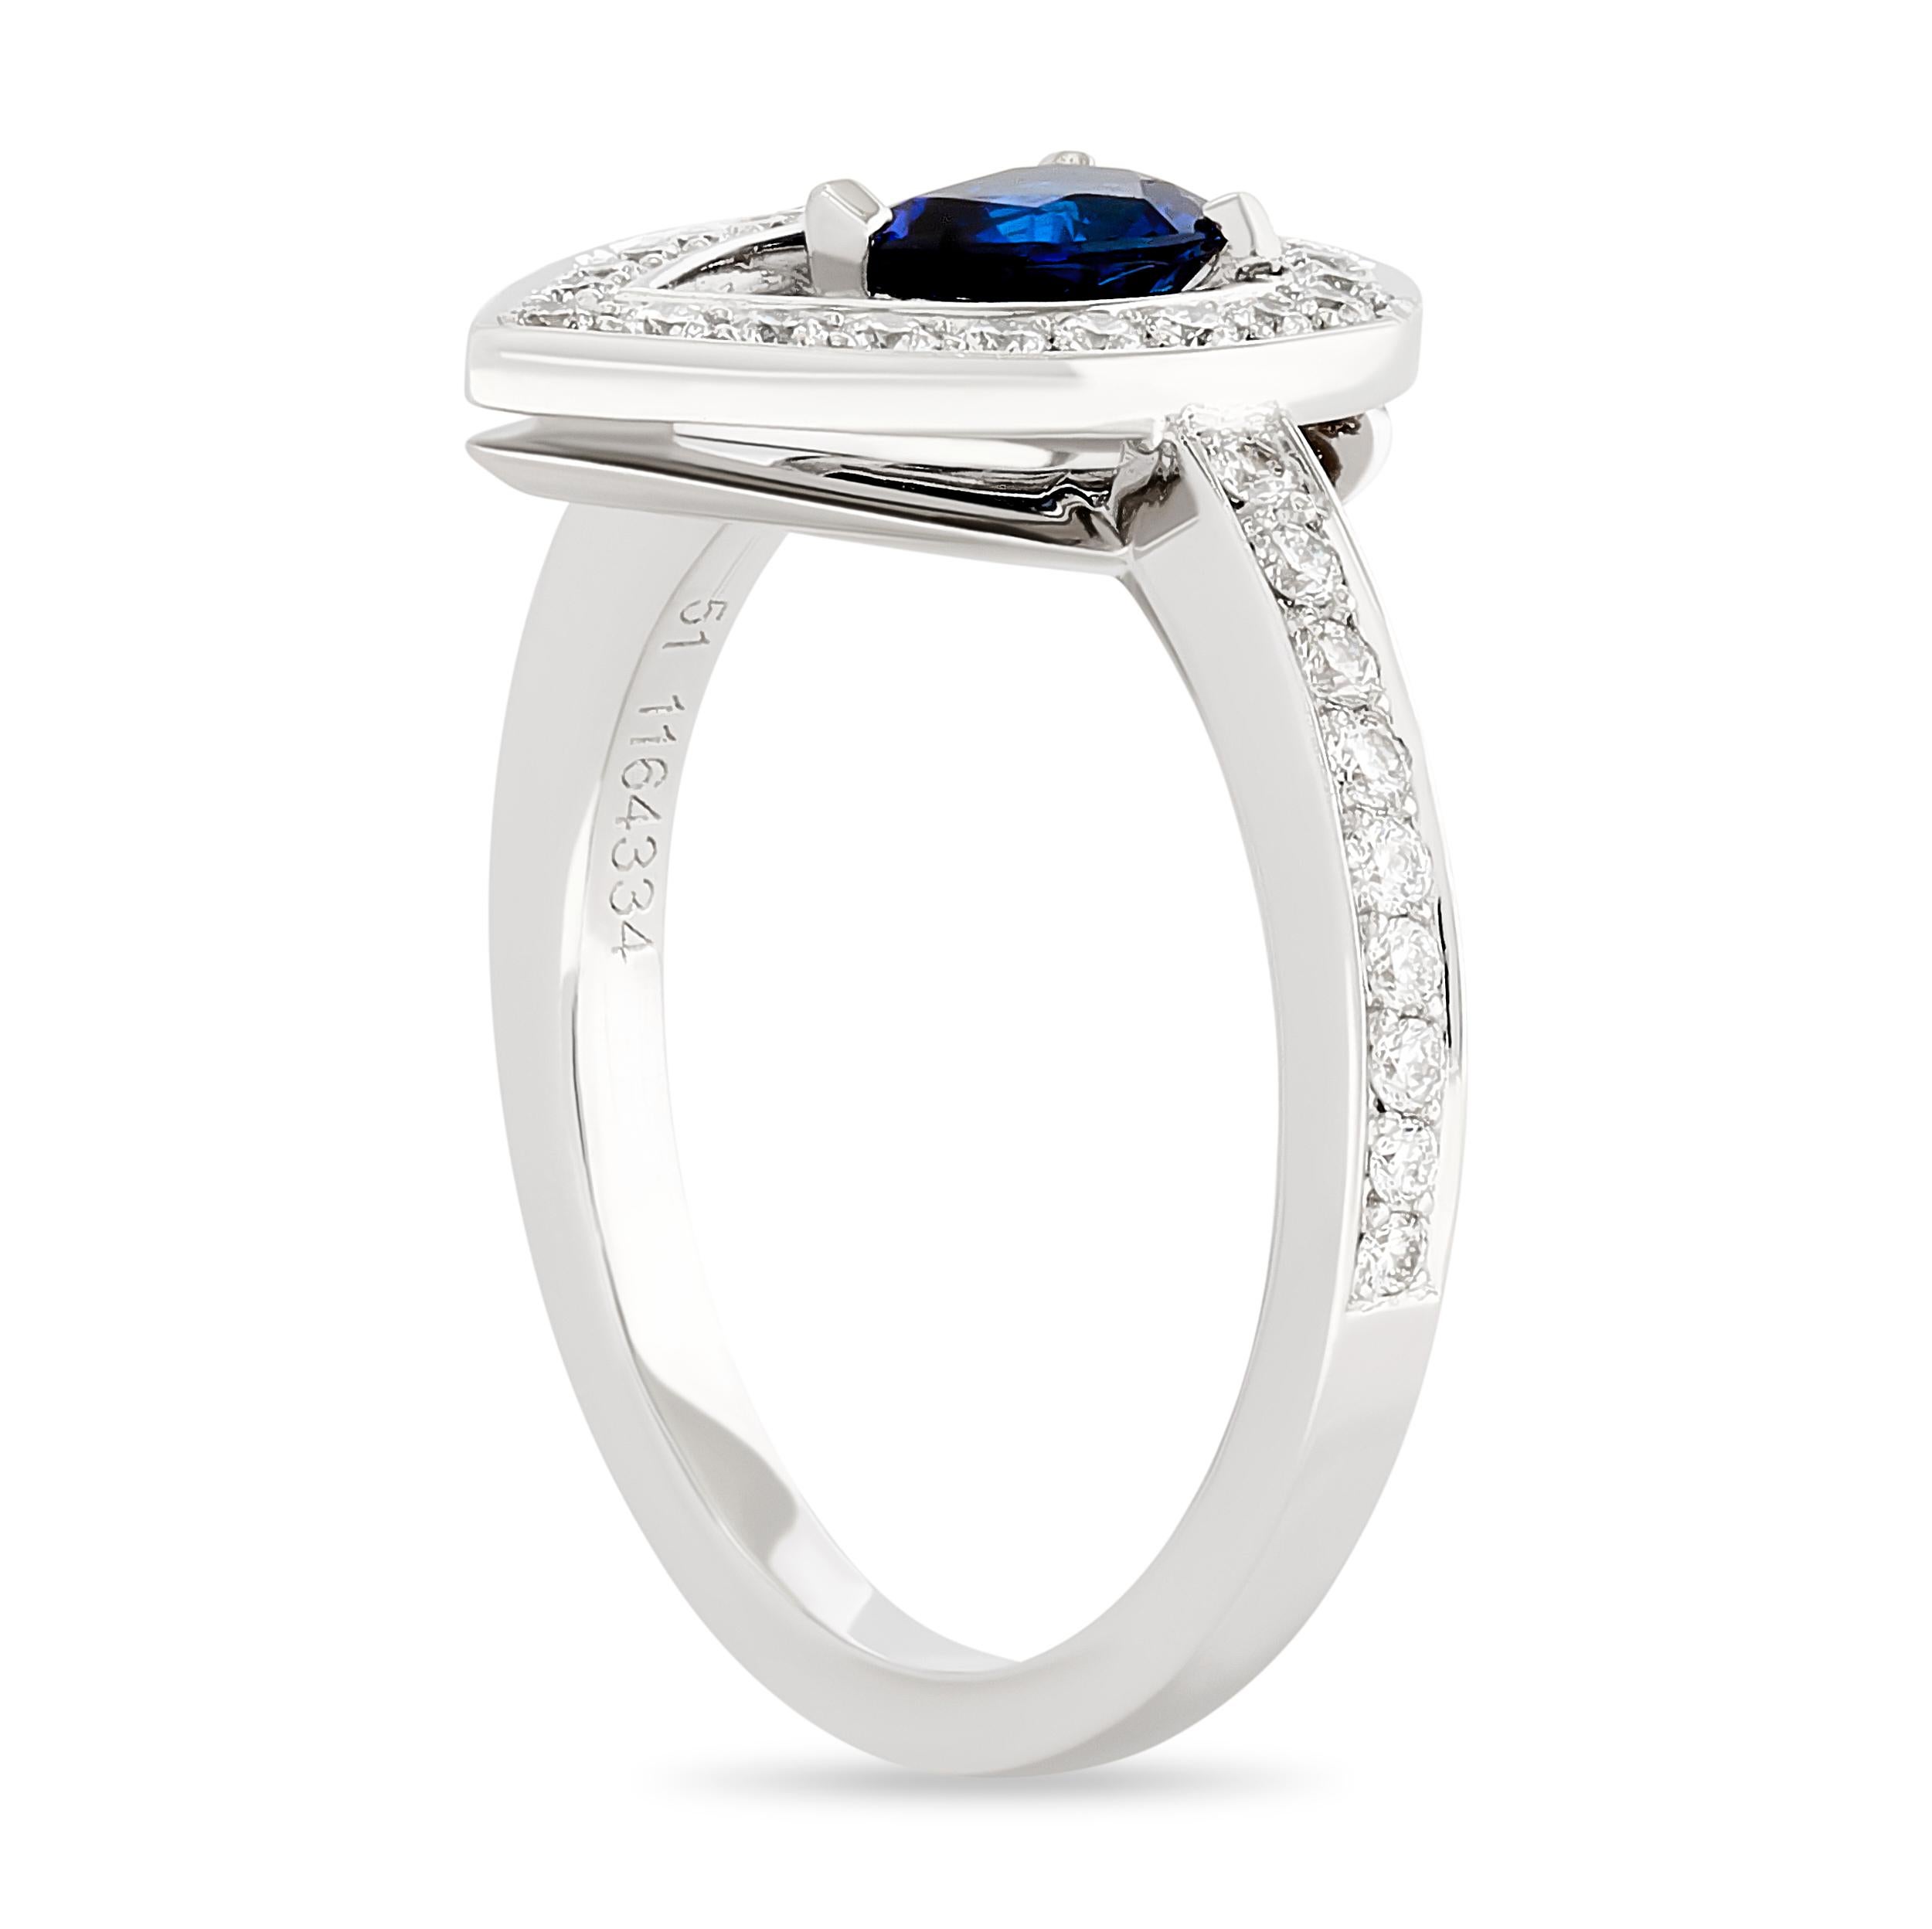 This Fred of Paris Lovelight ring has a bright blue pear shape sapphire at the center of a larger pear shape diamond halo on a diamond band. 

The pear sapphire weighs approximately 0.46 carat. There are 39 round diamonds that weigh approximately